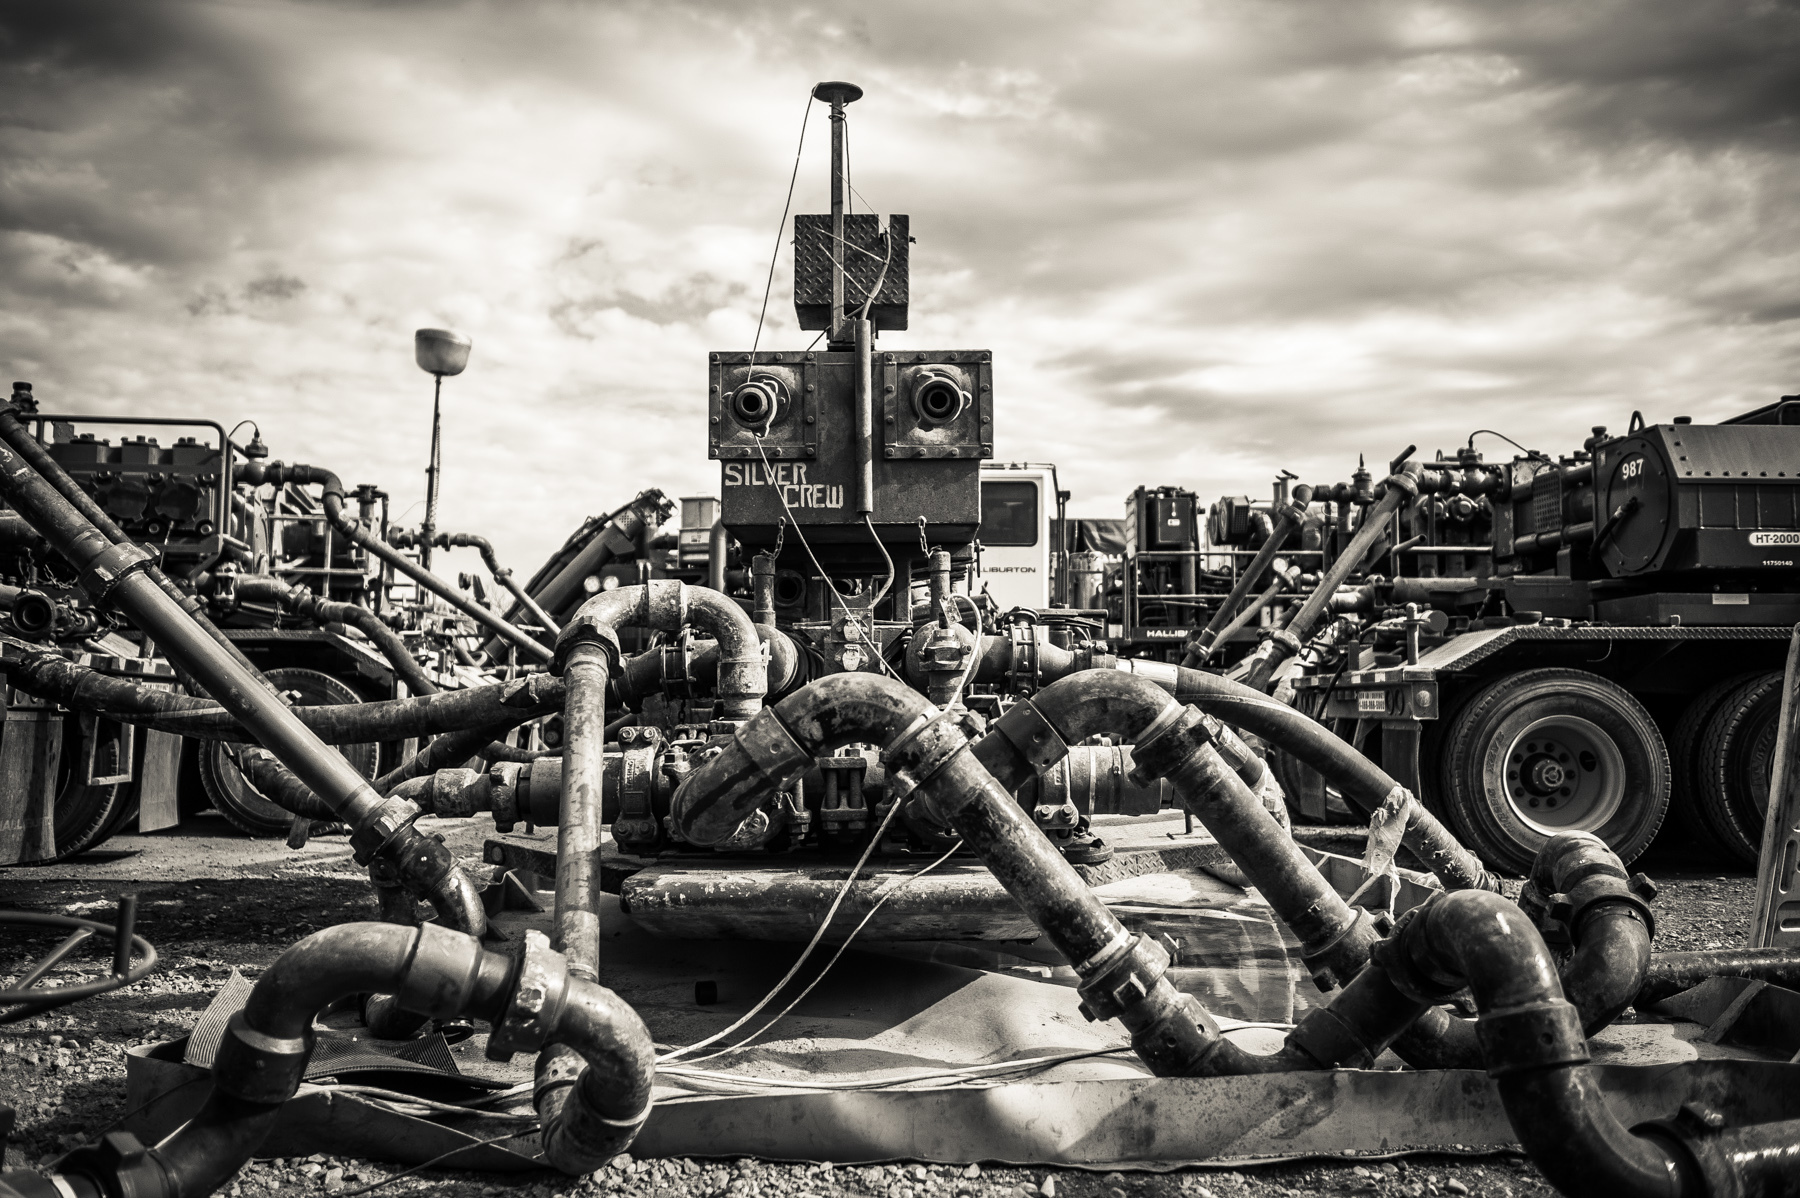  An oil well head during the process of Hydraulic Fracturing, aka fracking. The many pipes leading into the well contain water, sand and some chemical lubricants forced in by the massive pump trucks in the background.&nbsp; 